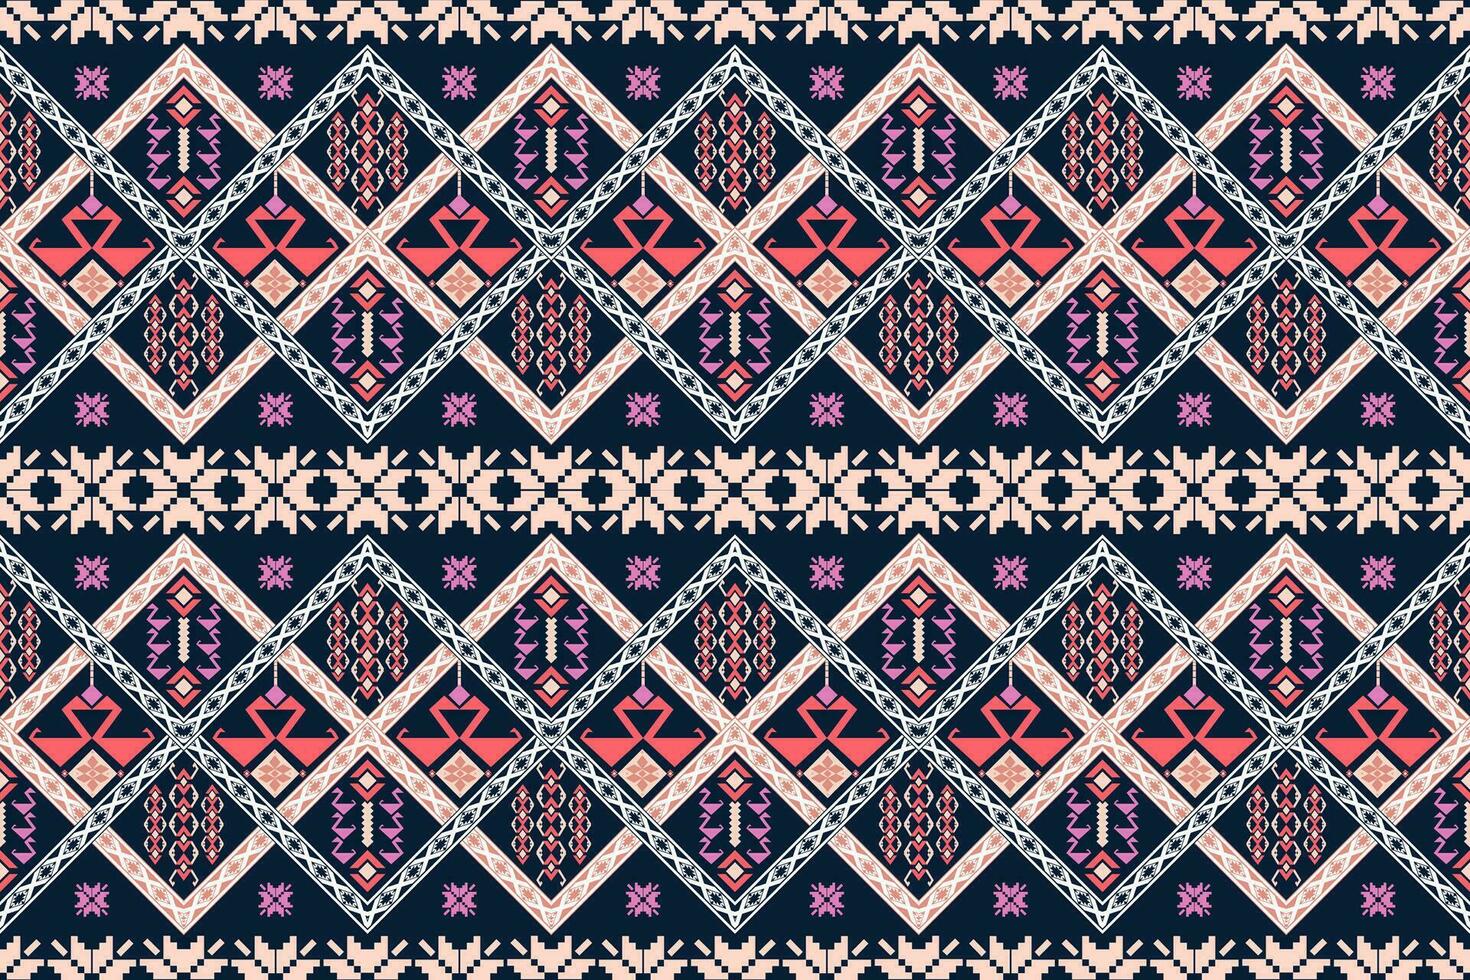 Geometric patchwork ethnic pattern vector for tribal boho design,Wallpaper,Wrapping,Fashion,Carpet,Clothing,Knitwear,Batik,Illustration.Ethnic abstract ikat.